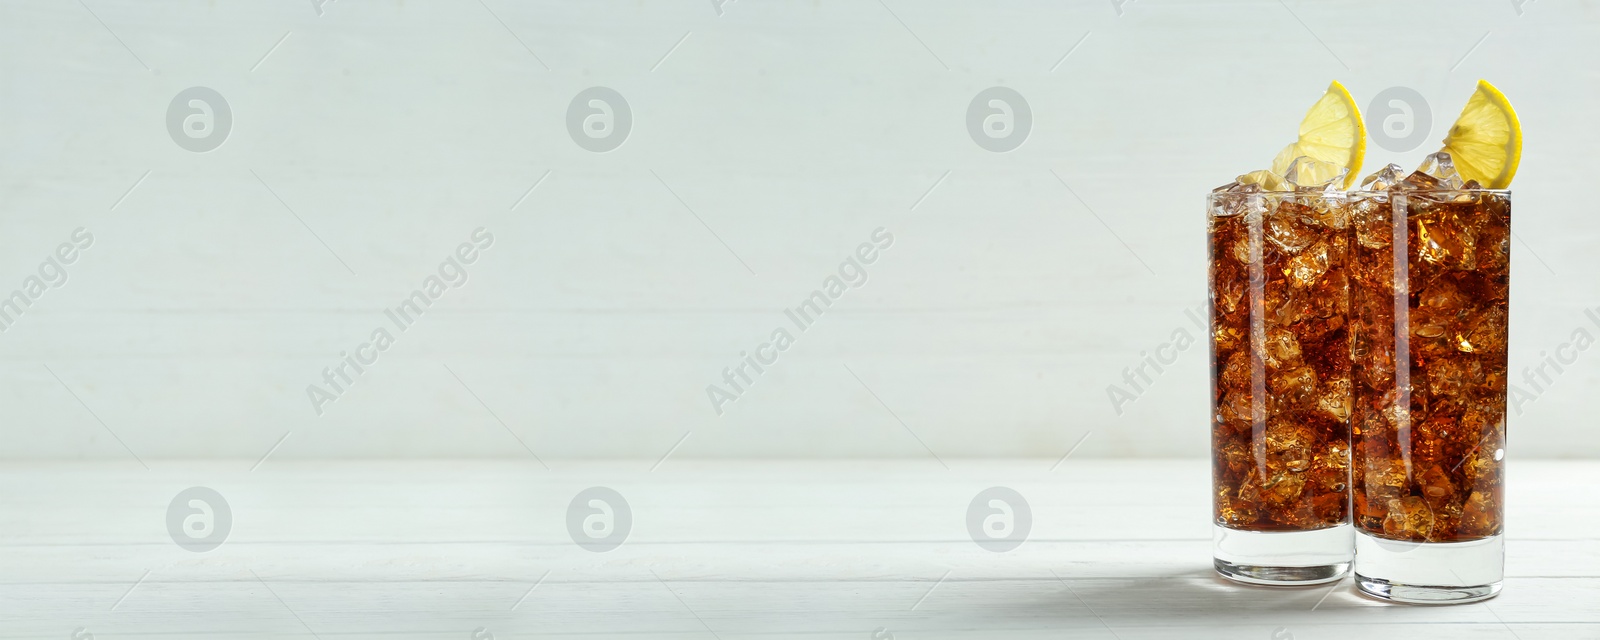 Image of Tasty refreshing soda drink with ice cubes and lemon slices on white wooden table. Banner design with space for text